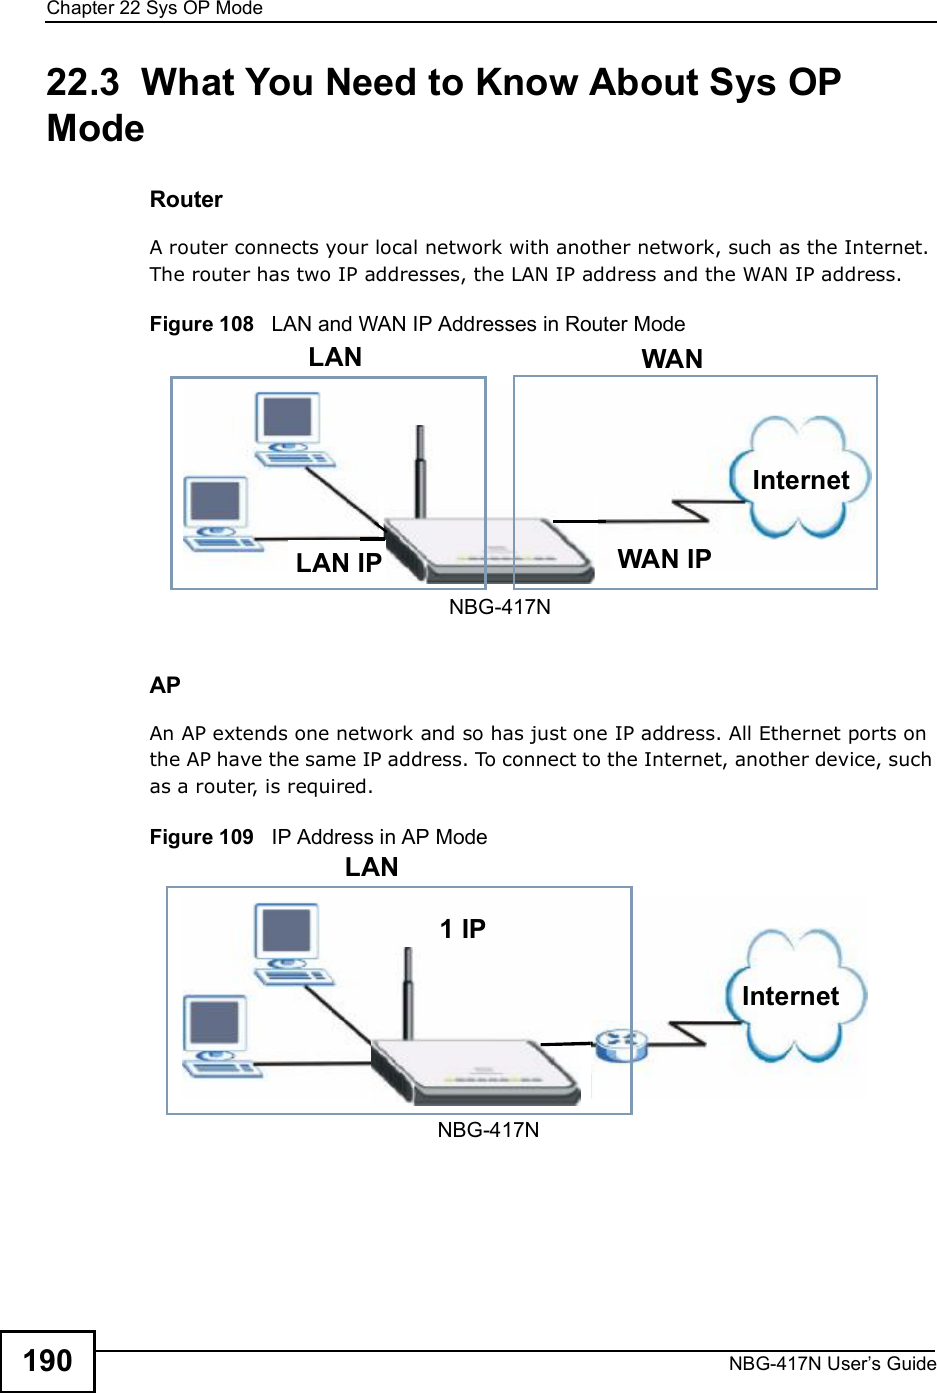 Chapter 22Sys OP ModeNBG-417N User s Guide19022.3  What You Need to Know About Sys OP ModeRouterA router connects your local network with another network, such as the Internet. The router has two IP addresses, the LAN IP address and the WAN IP address.Figure 108   LAN and WAN IP Addresses in Router ModeAPAn AP extends one network and so has just one IP address. All Ethernet ports on the AP have the same IP address. To connect to the Internet, another device, such as a router, is required.Figure 109   IP Address in AP Mode  WAN IPInternetLAN WANLAN IPNBG-417N  1 IPLANInternetNBG-417N